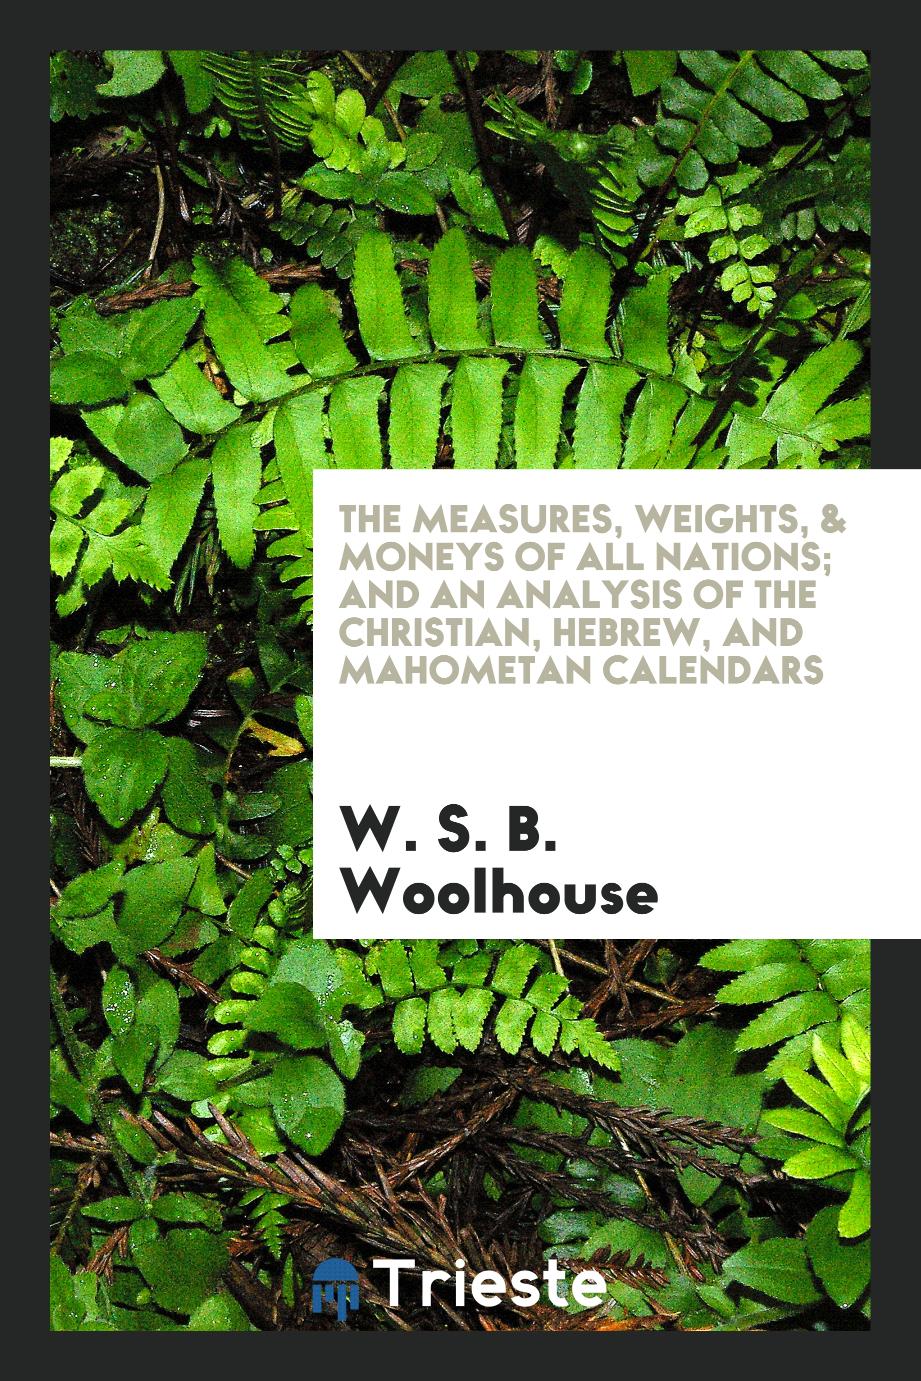 The Measures, Weights, & Moneys of All Nations; And an Analysis of the Christian, Hebrew, and Mahometan Calendars